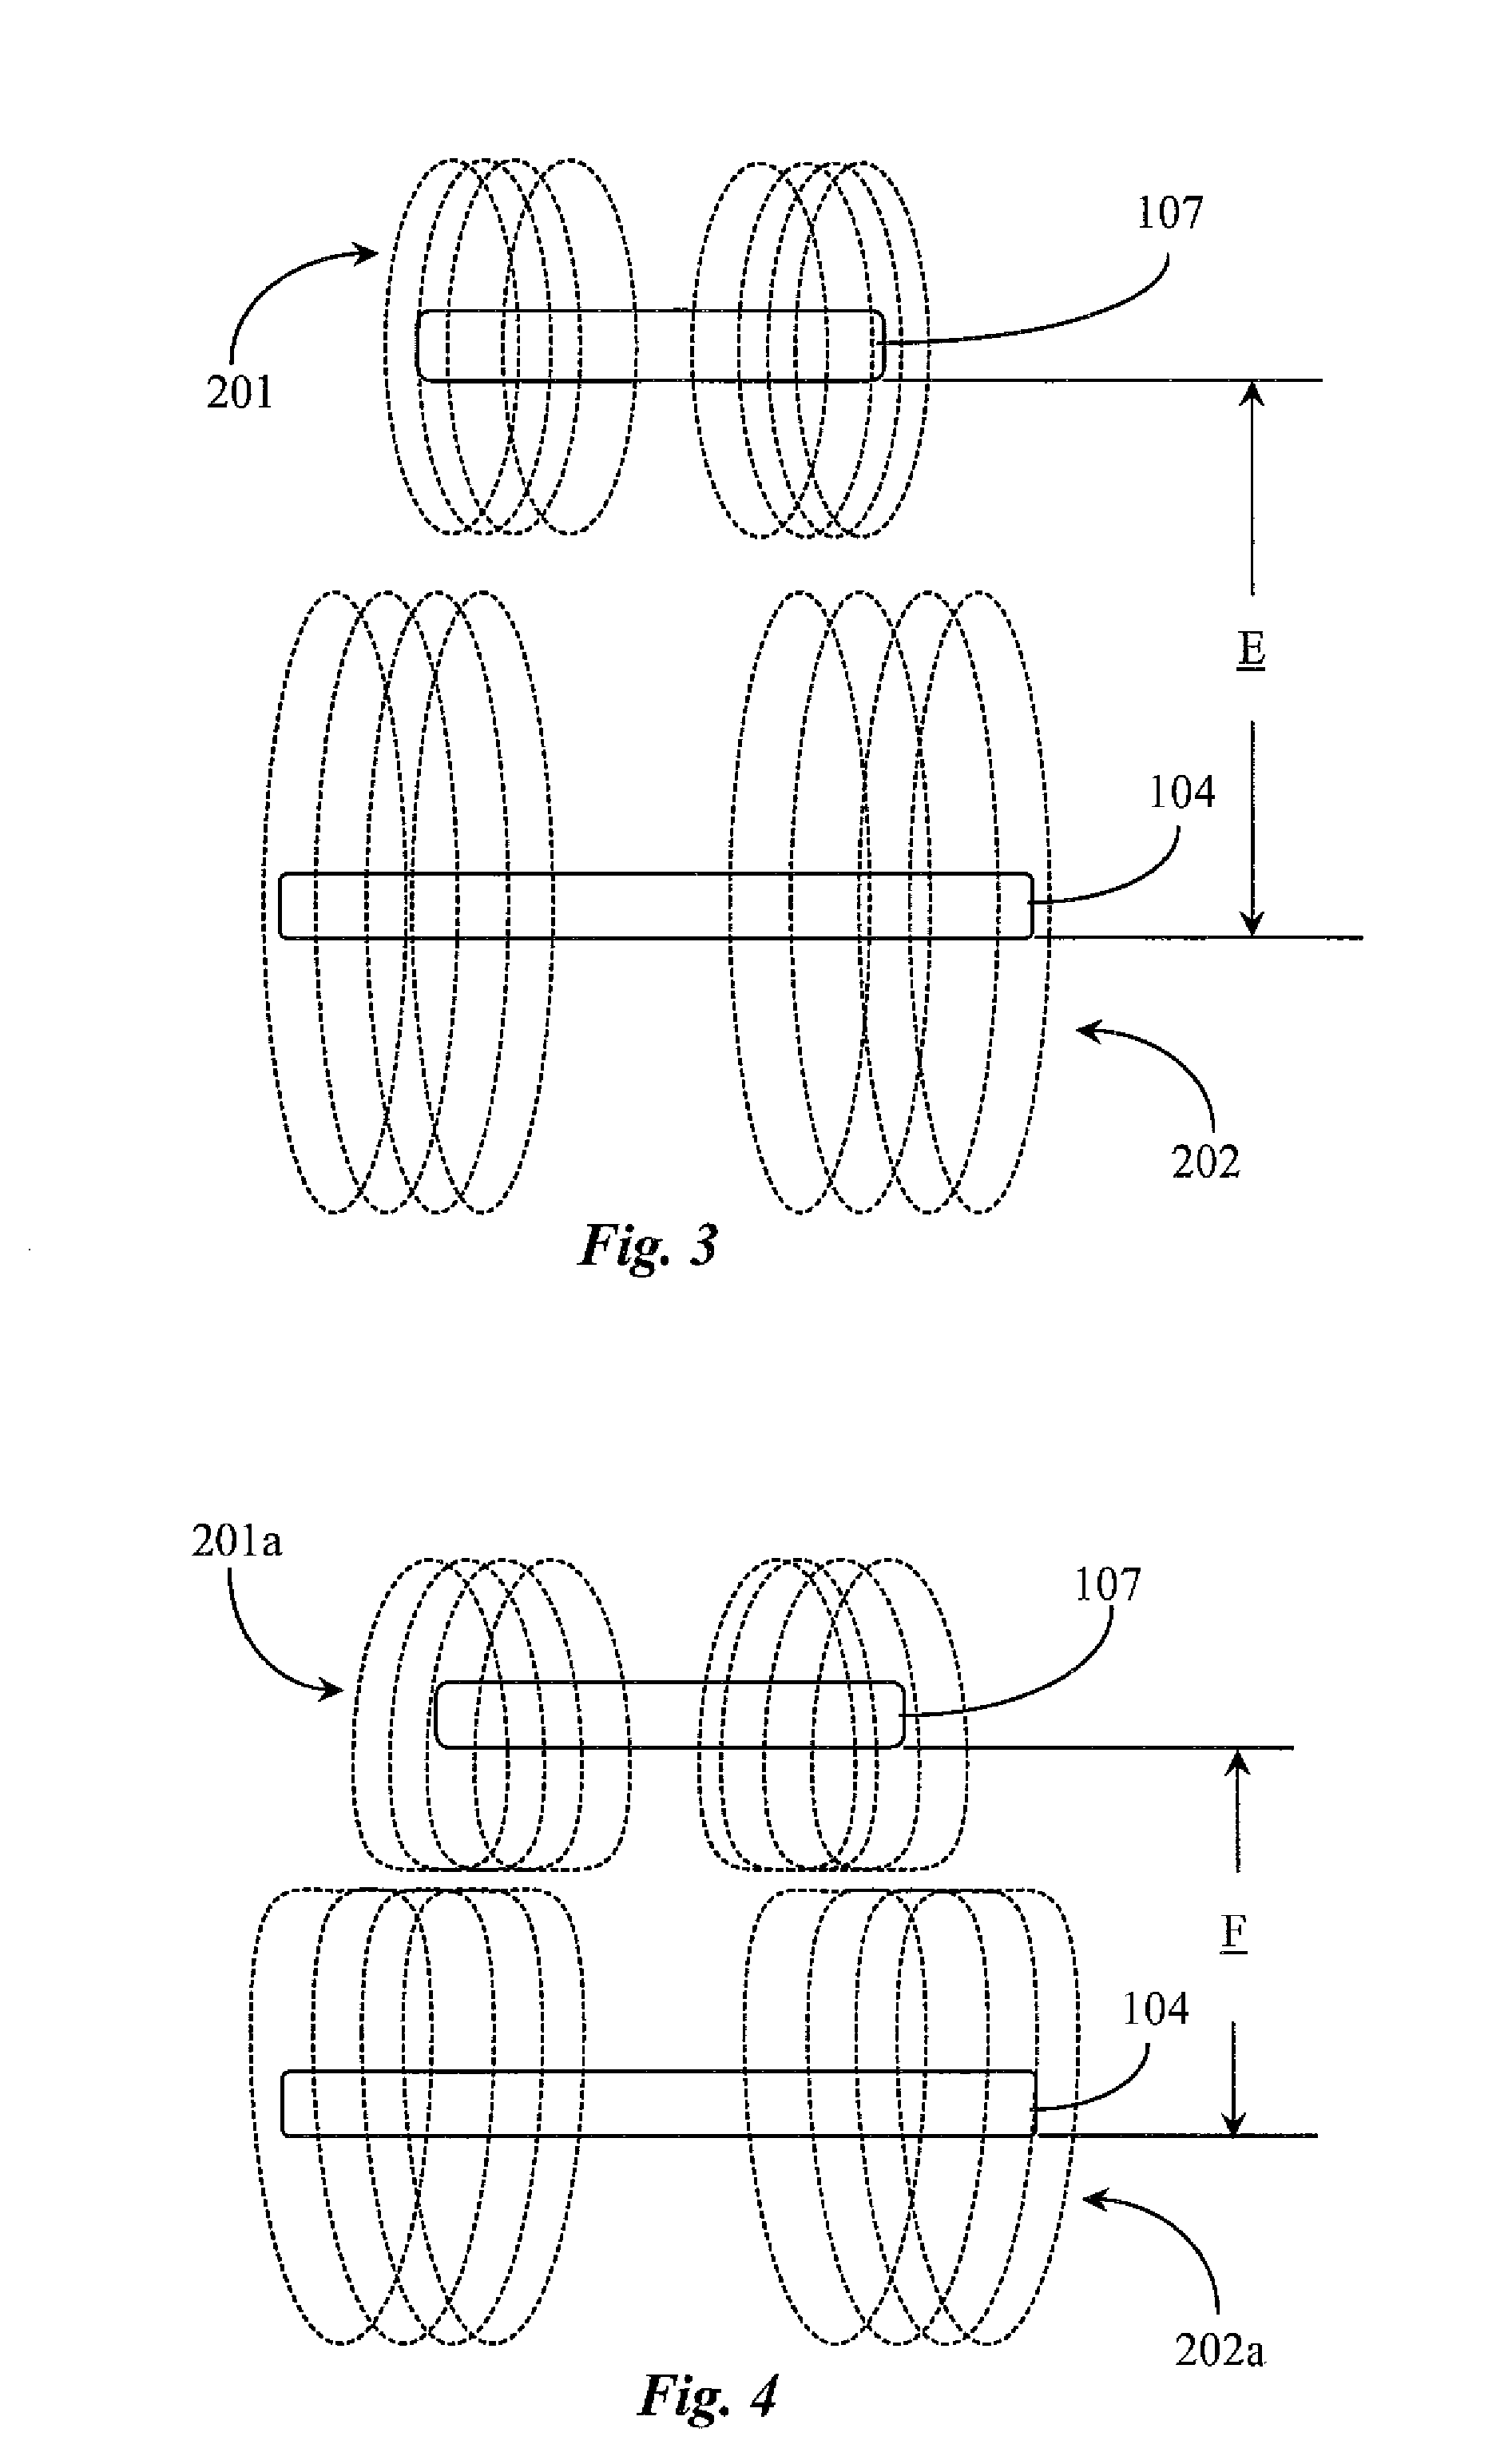 System and Apparatus for Dynamically Assigning Functions for Keys of a Computerized Keyboard Based on the Analysis of Keystrokes